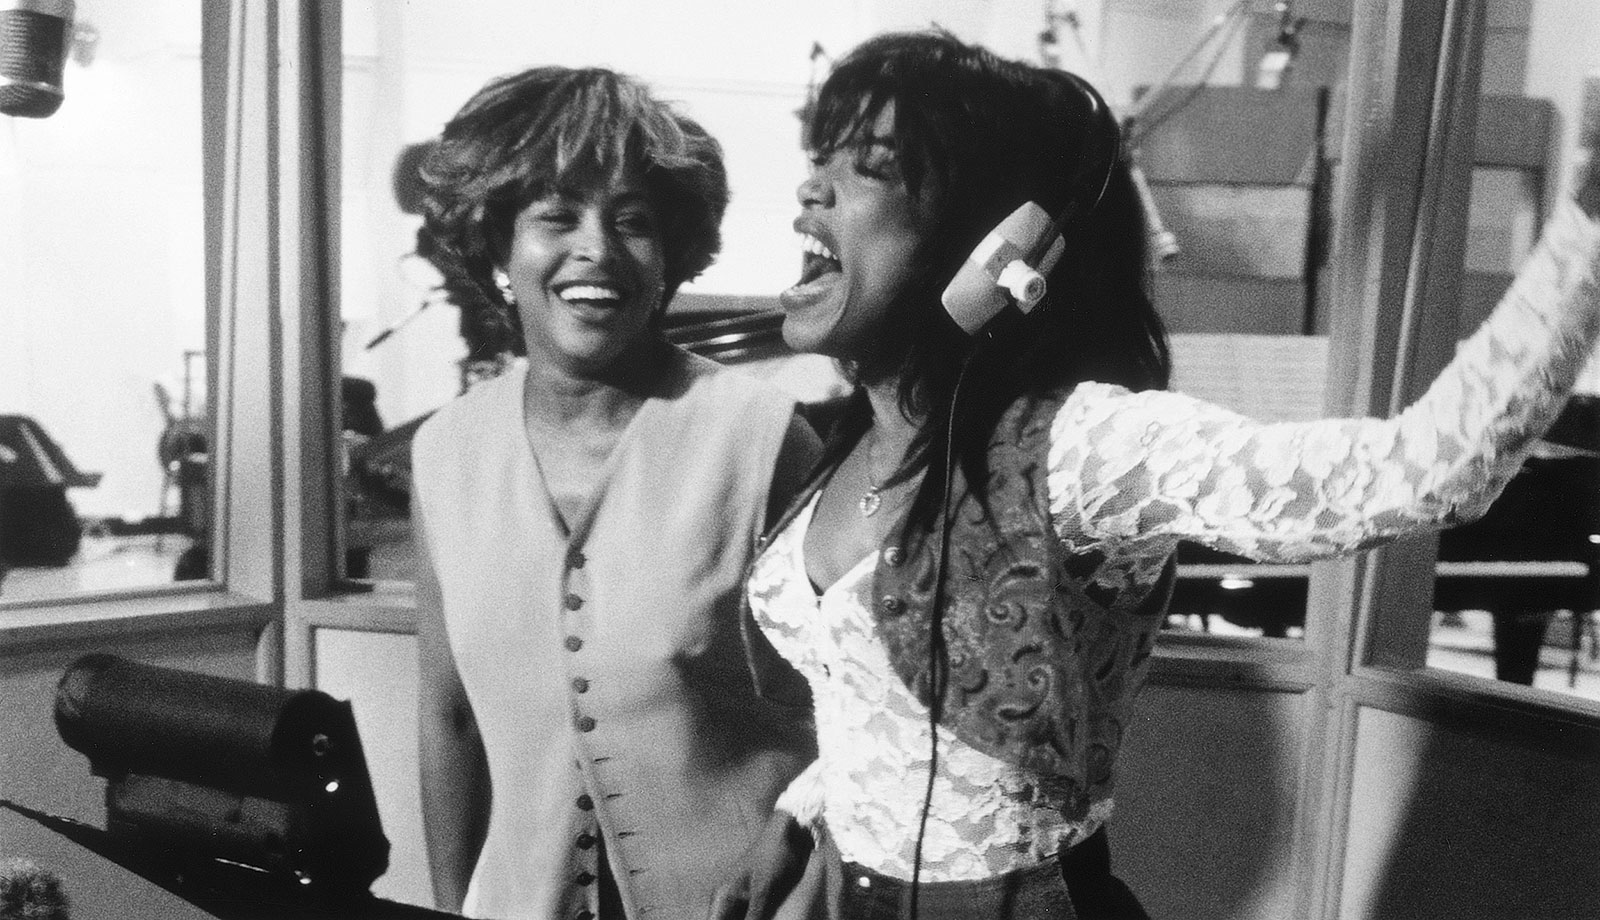 Turner and Angela Bassett rehearse a song performance in 1993 for the film "What's Love Got to Do with It."